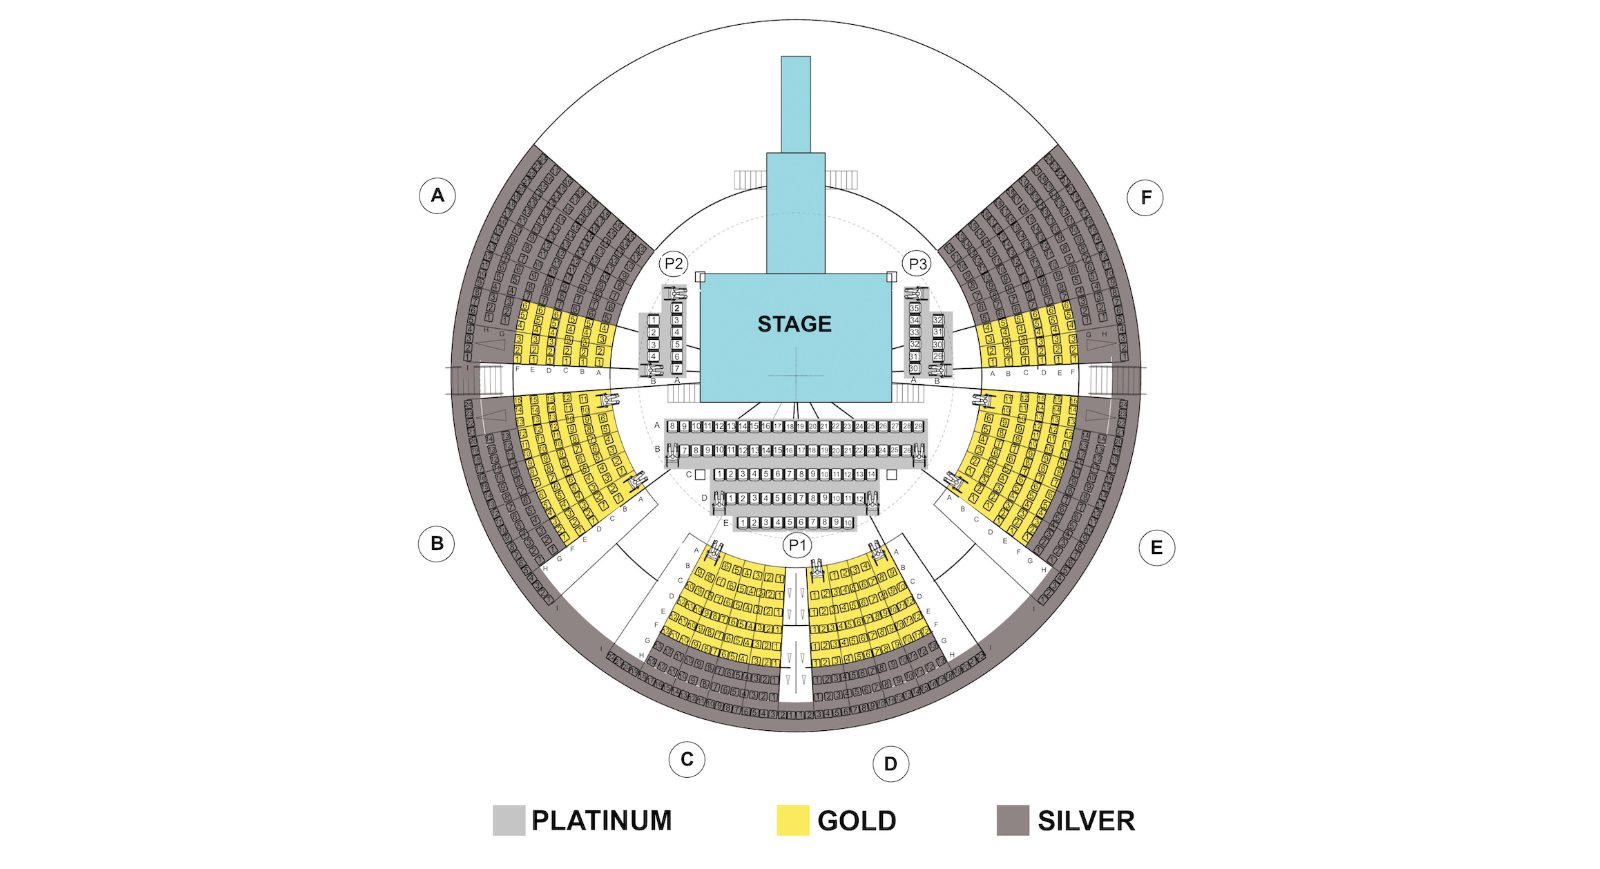 Legends In Concert Myrtle Beach Sc Seating Chart